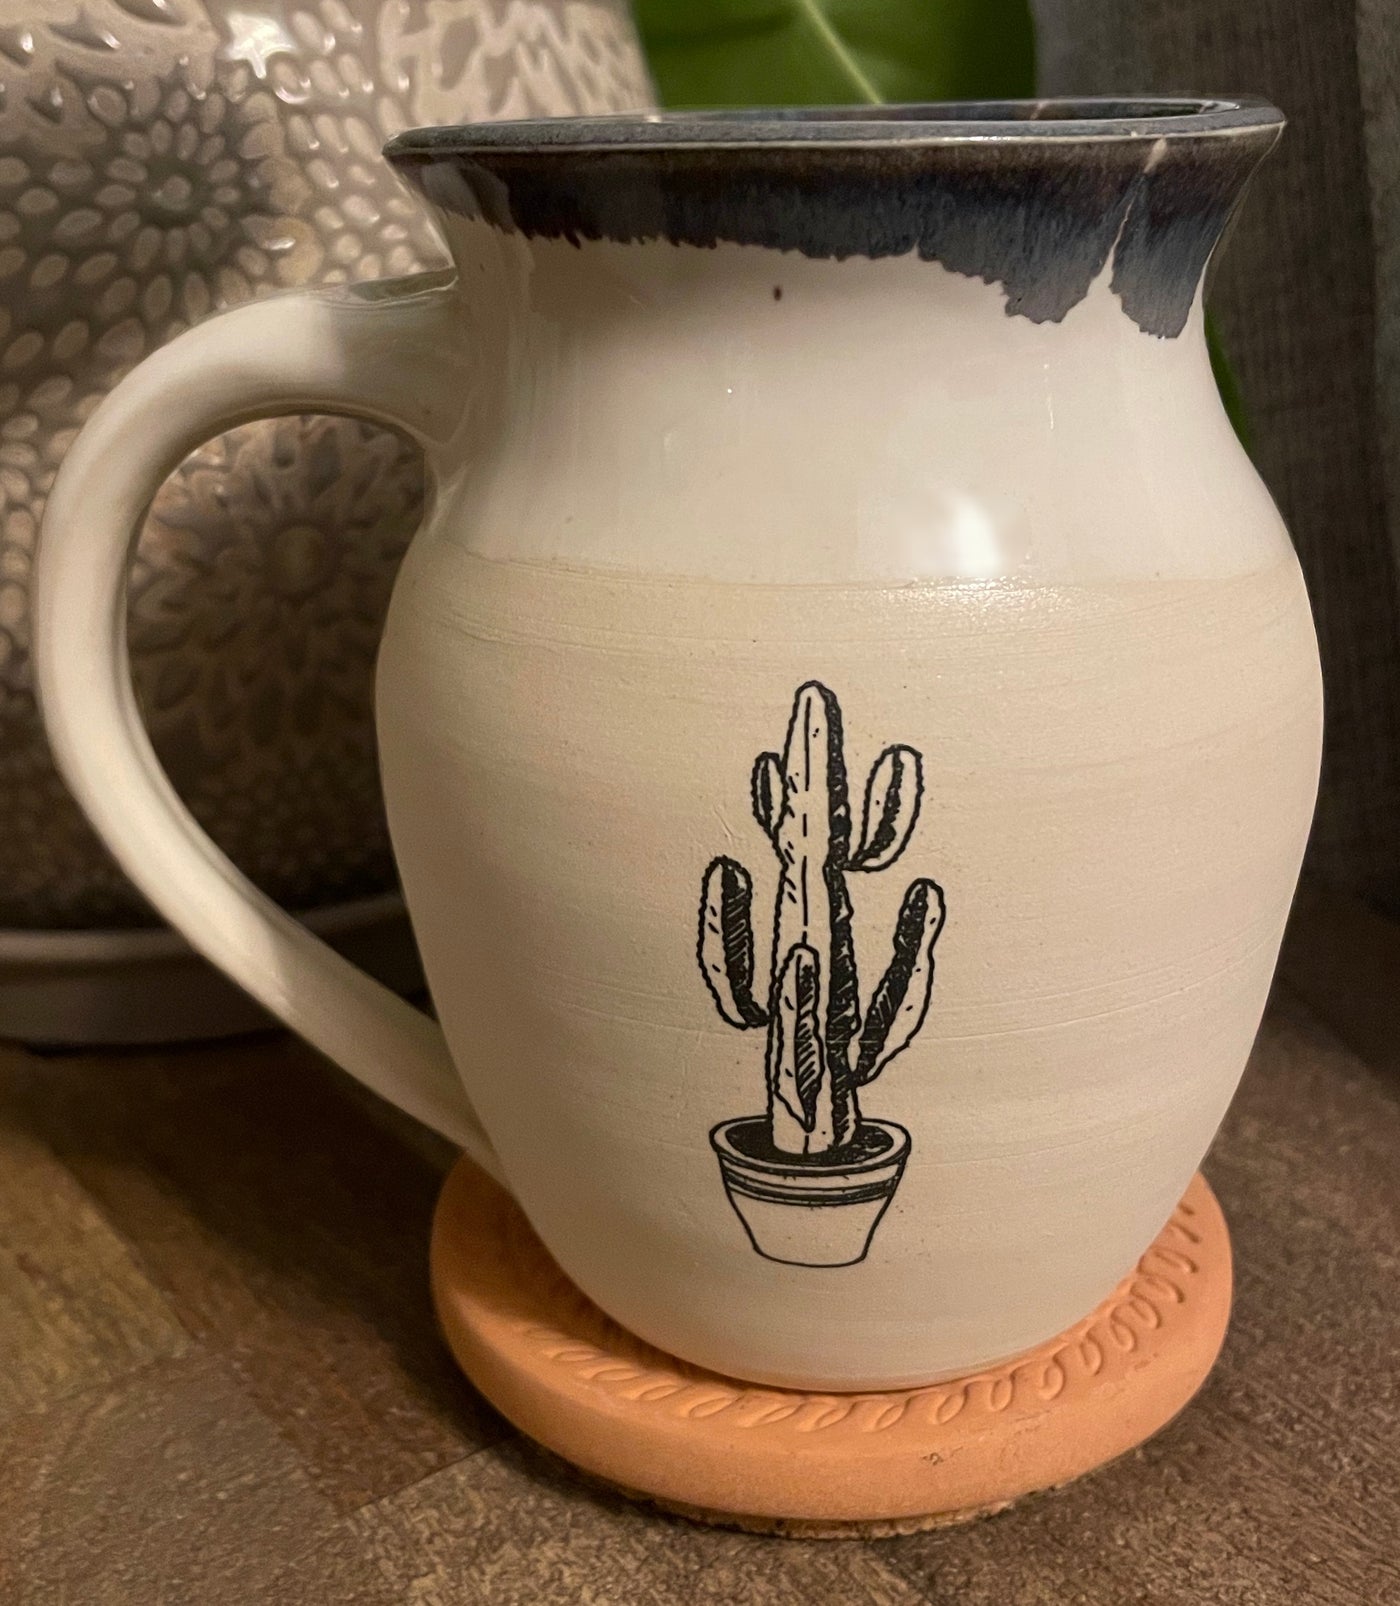 B7 These small batch, handmade mugs are available in blue or green. Each mug is stamped with a unique plant design. Explore the best and coolest gift ideas for plant enthusiasts!